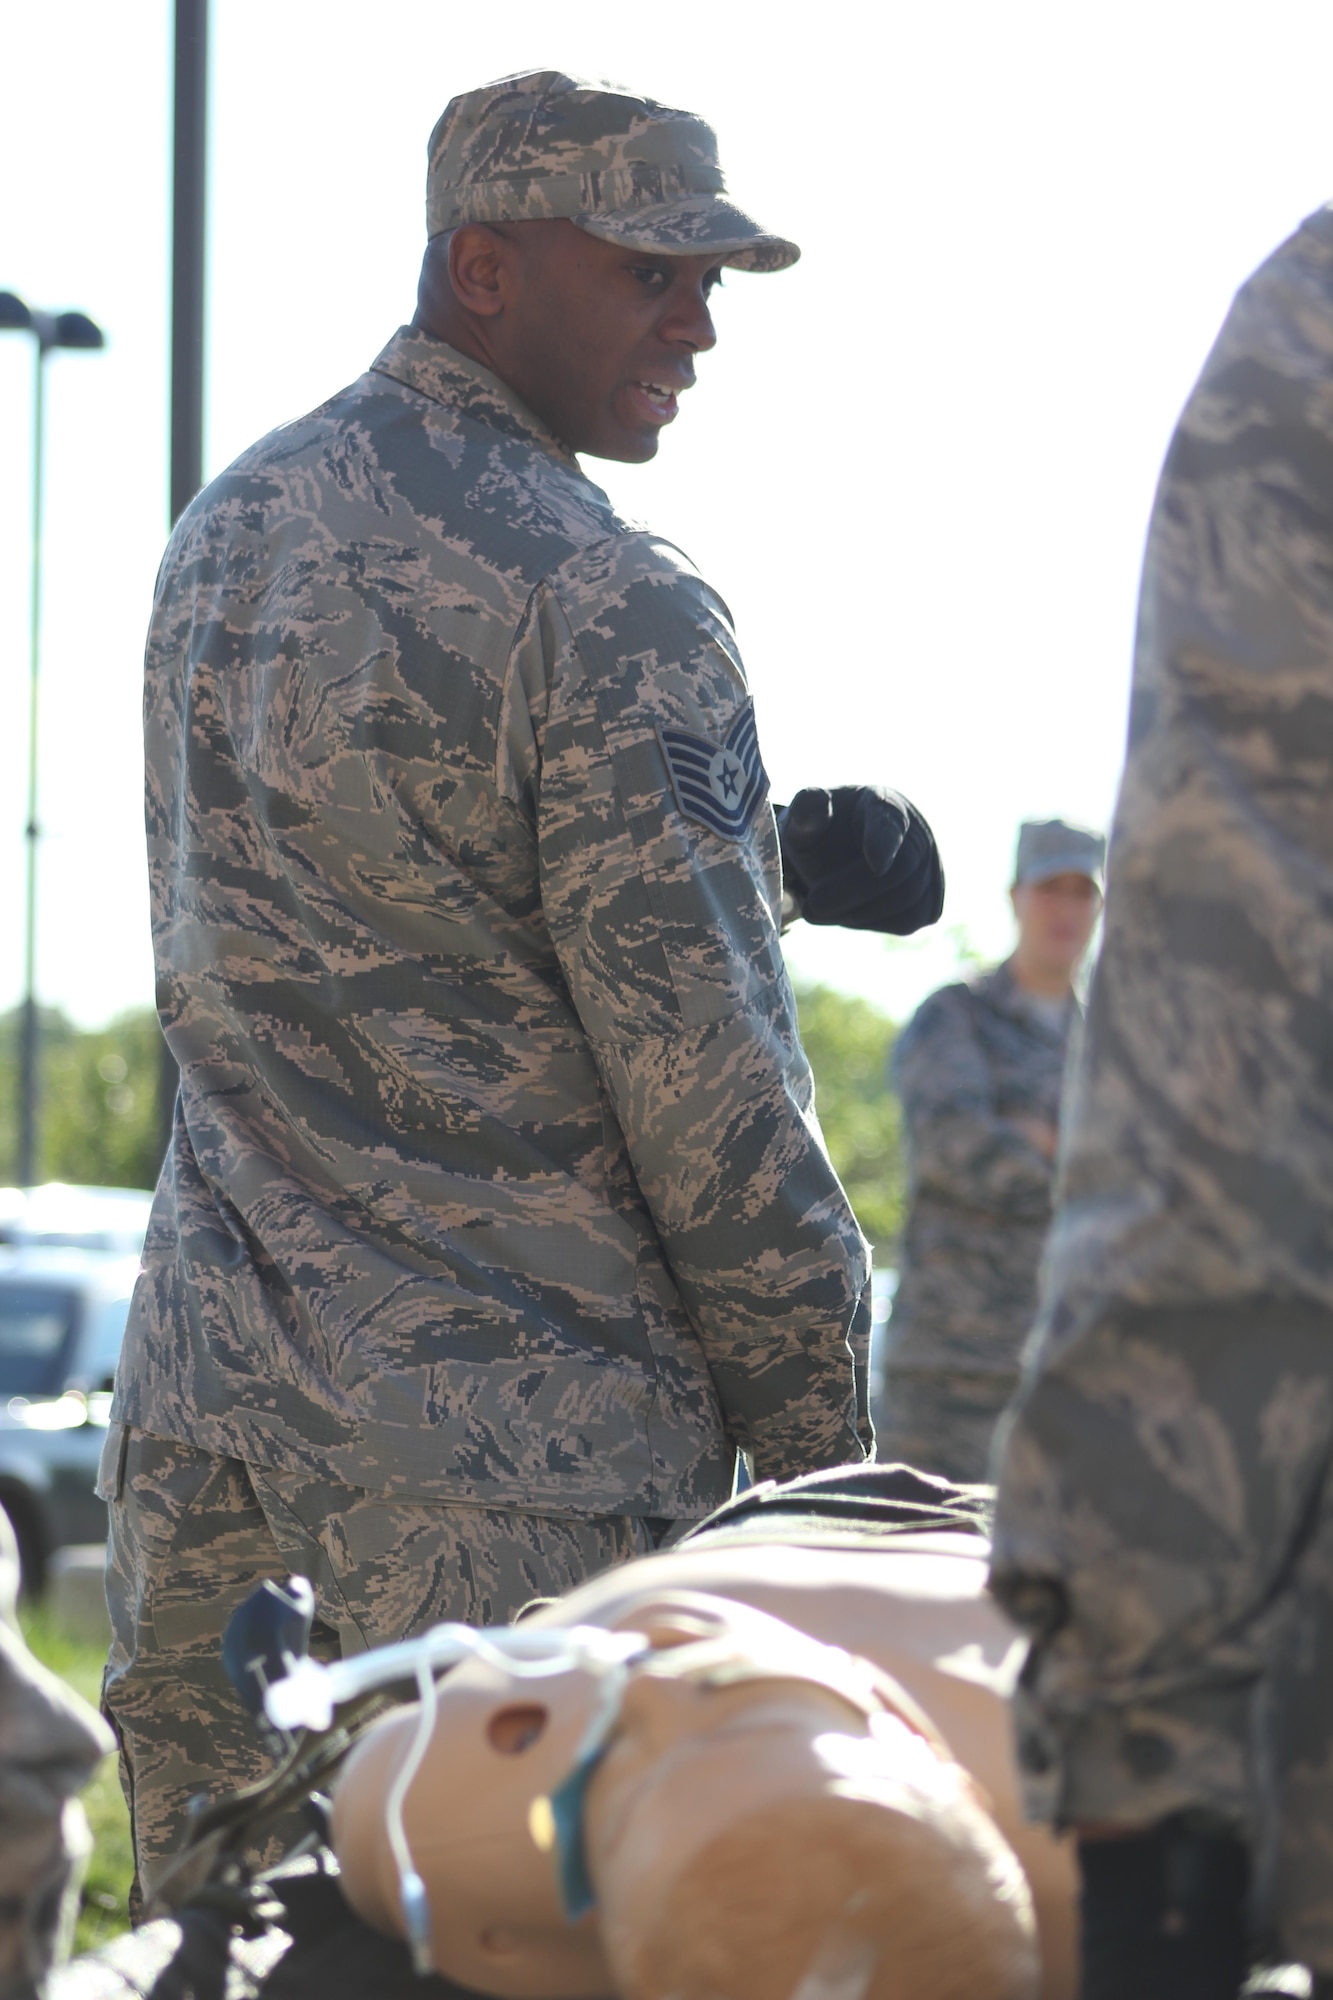 Technical Sgt. Larry Minor, 459th Aeromedical Staging Squadron aerospace medical technician, conducts litter carry training at Joint Base Andrews, Md., May 15, 2016.  The training was part of a two-hour exercise to practice the en route patient staging system.  (U.S. Air Force photo by/Tech. Sgt. Brent A. Skeen)